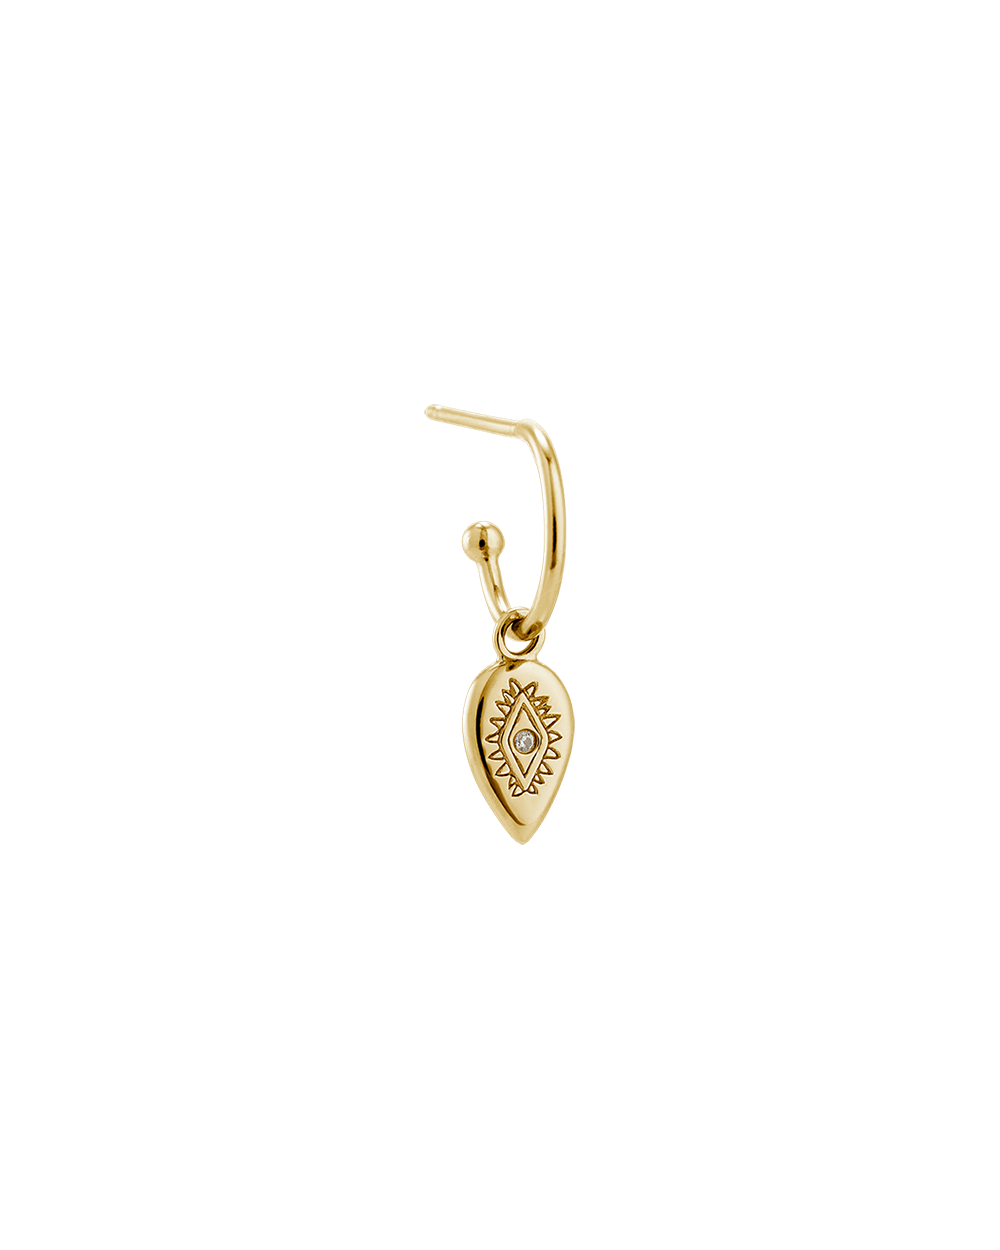 ETCHED TEARDROP HOOPS (18K GOLD PLATED) - IMAGE 5